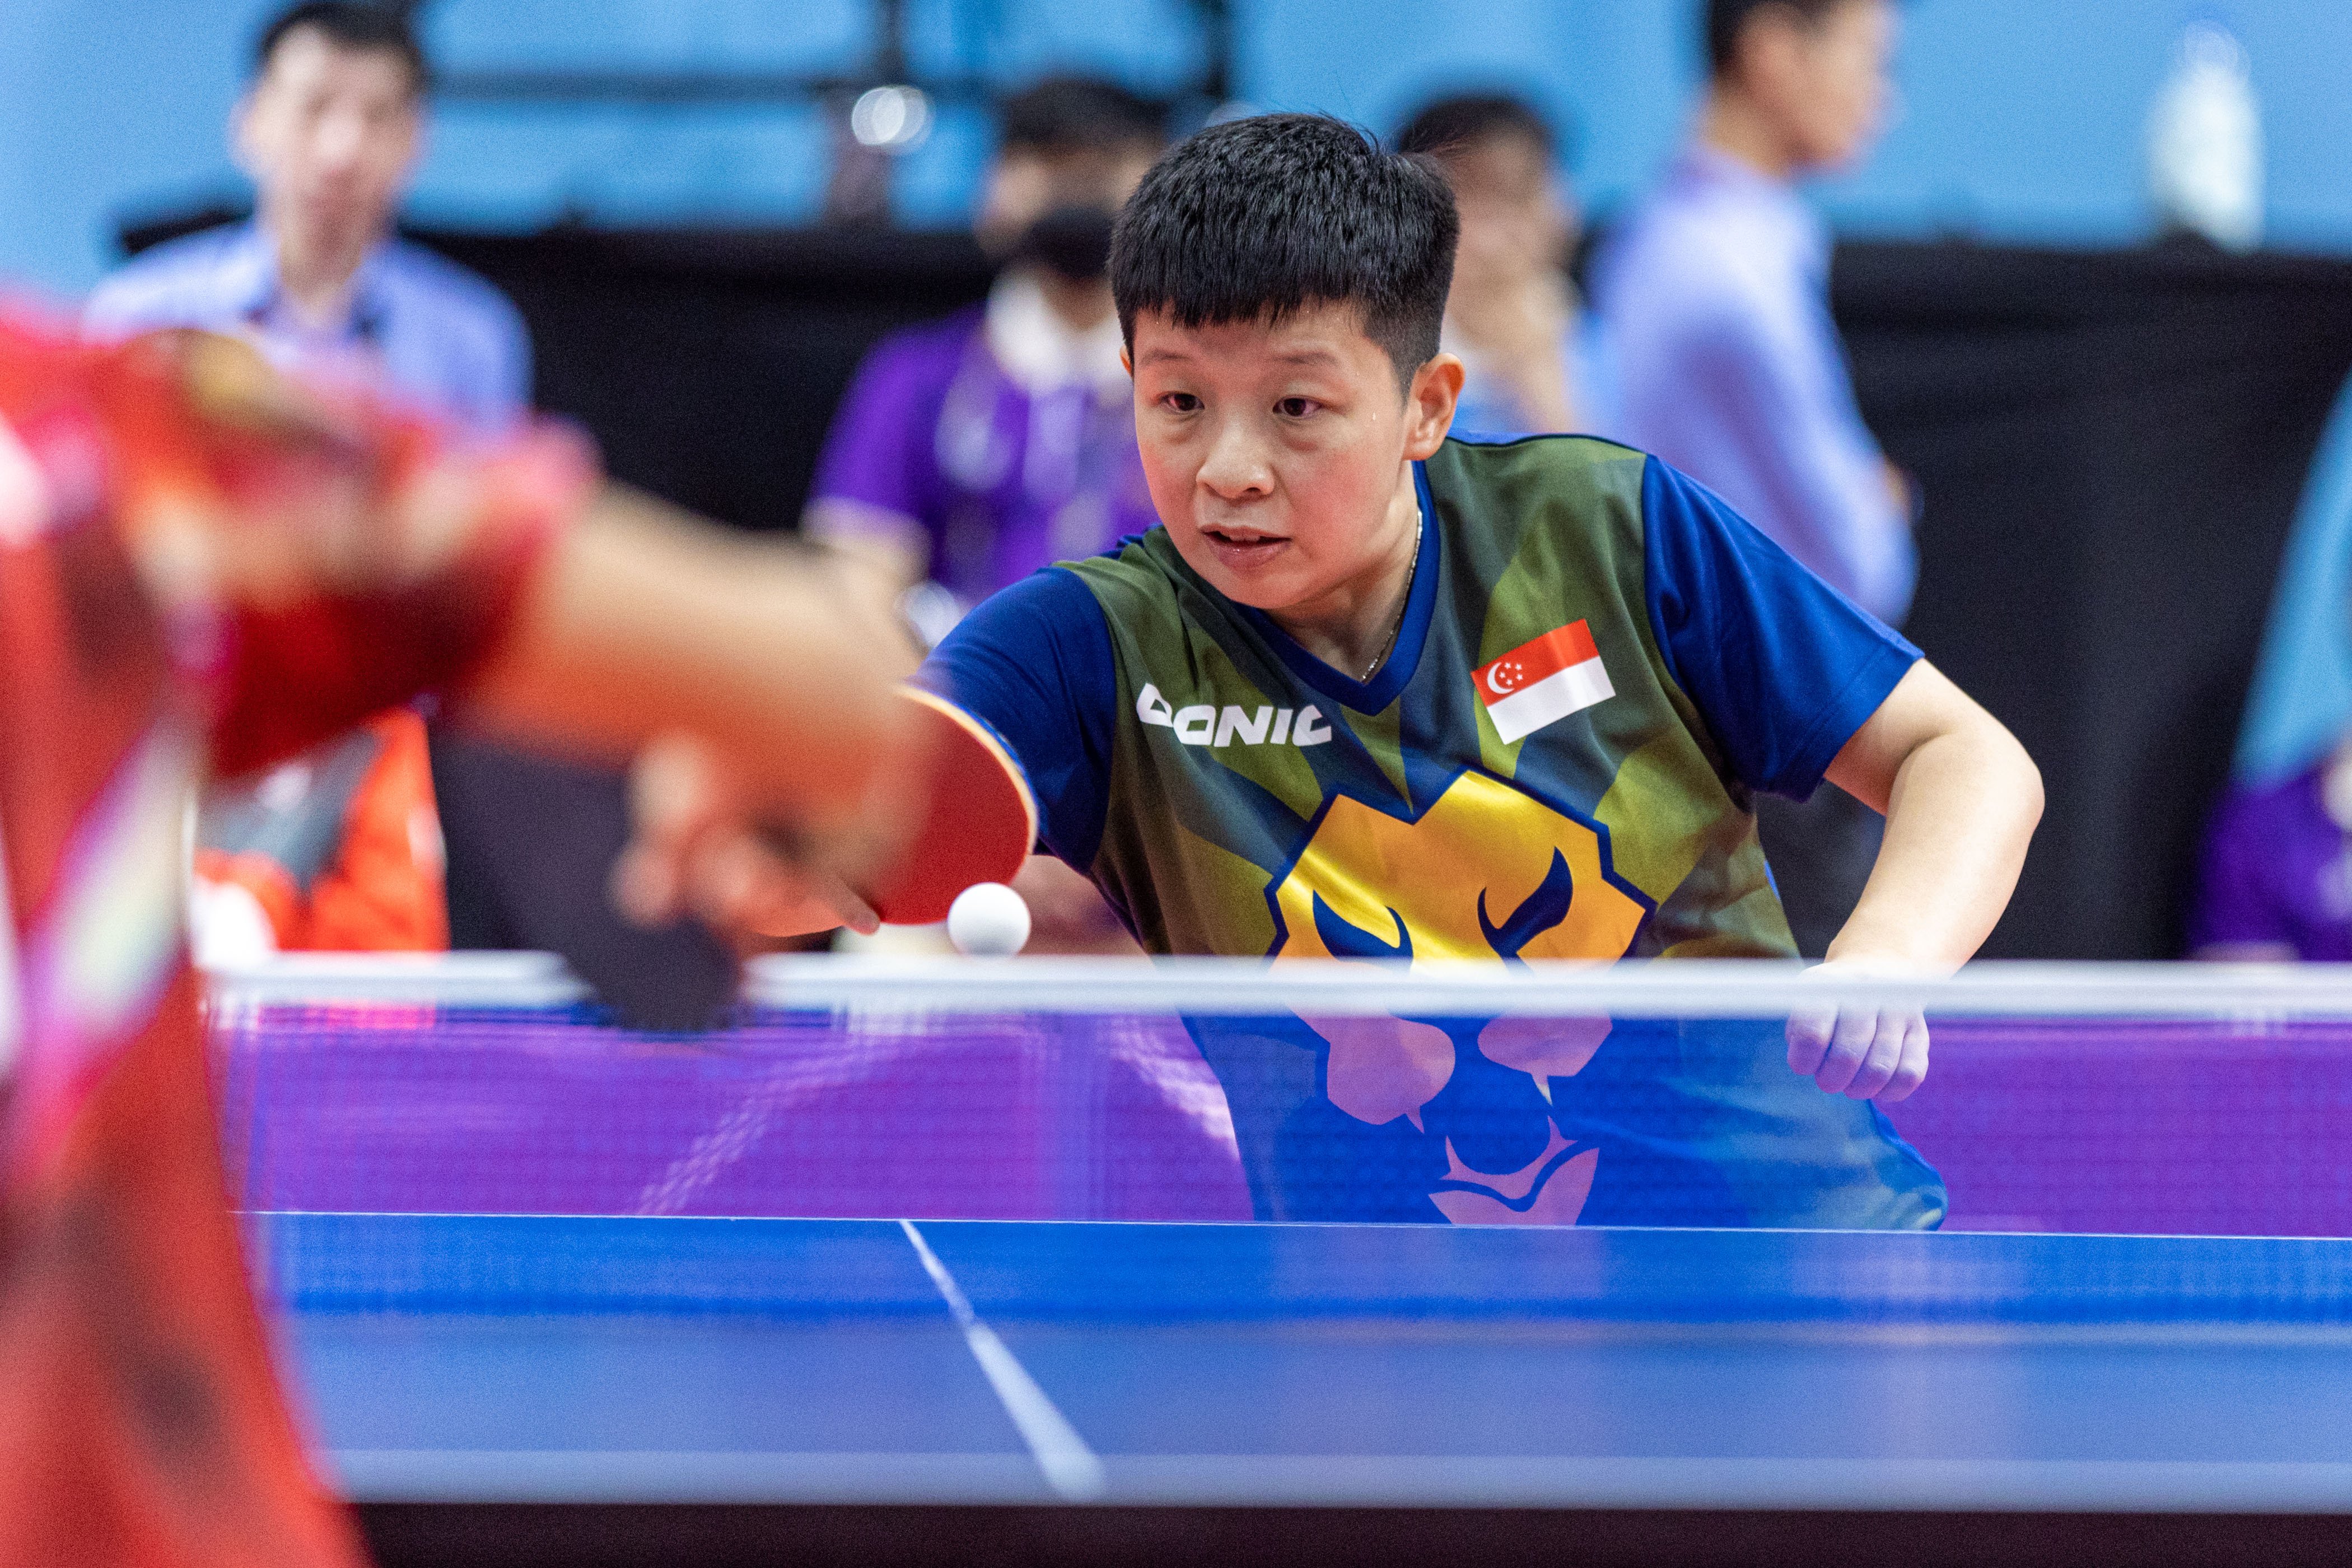 20230509_TABLE TENNIS_dt-63